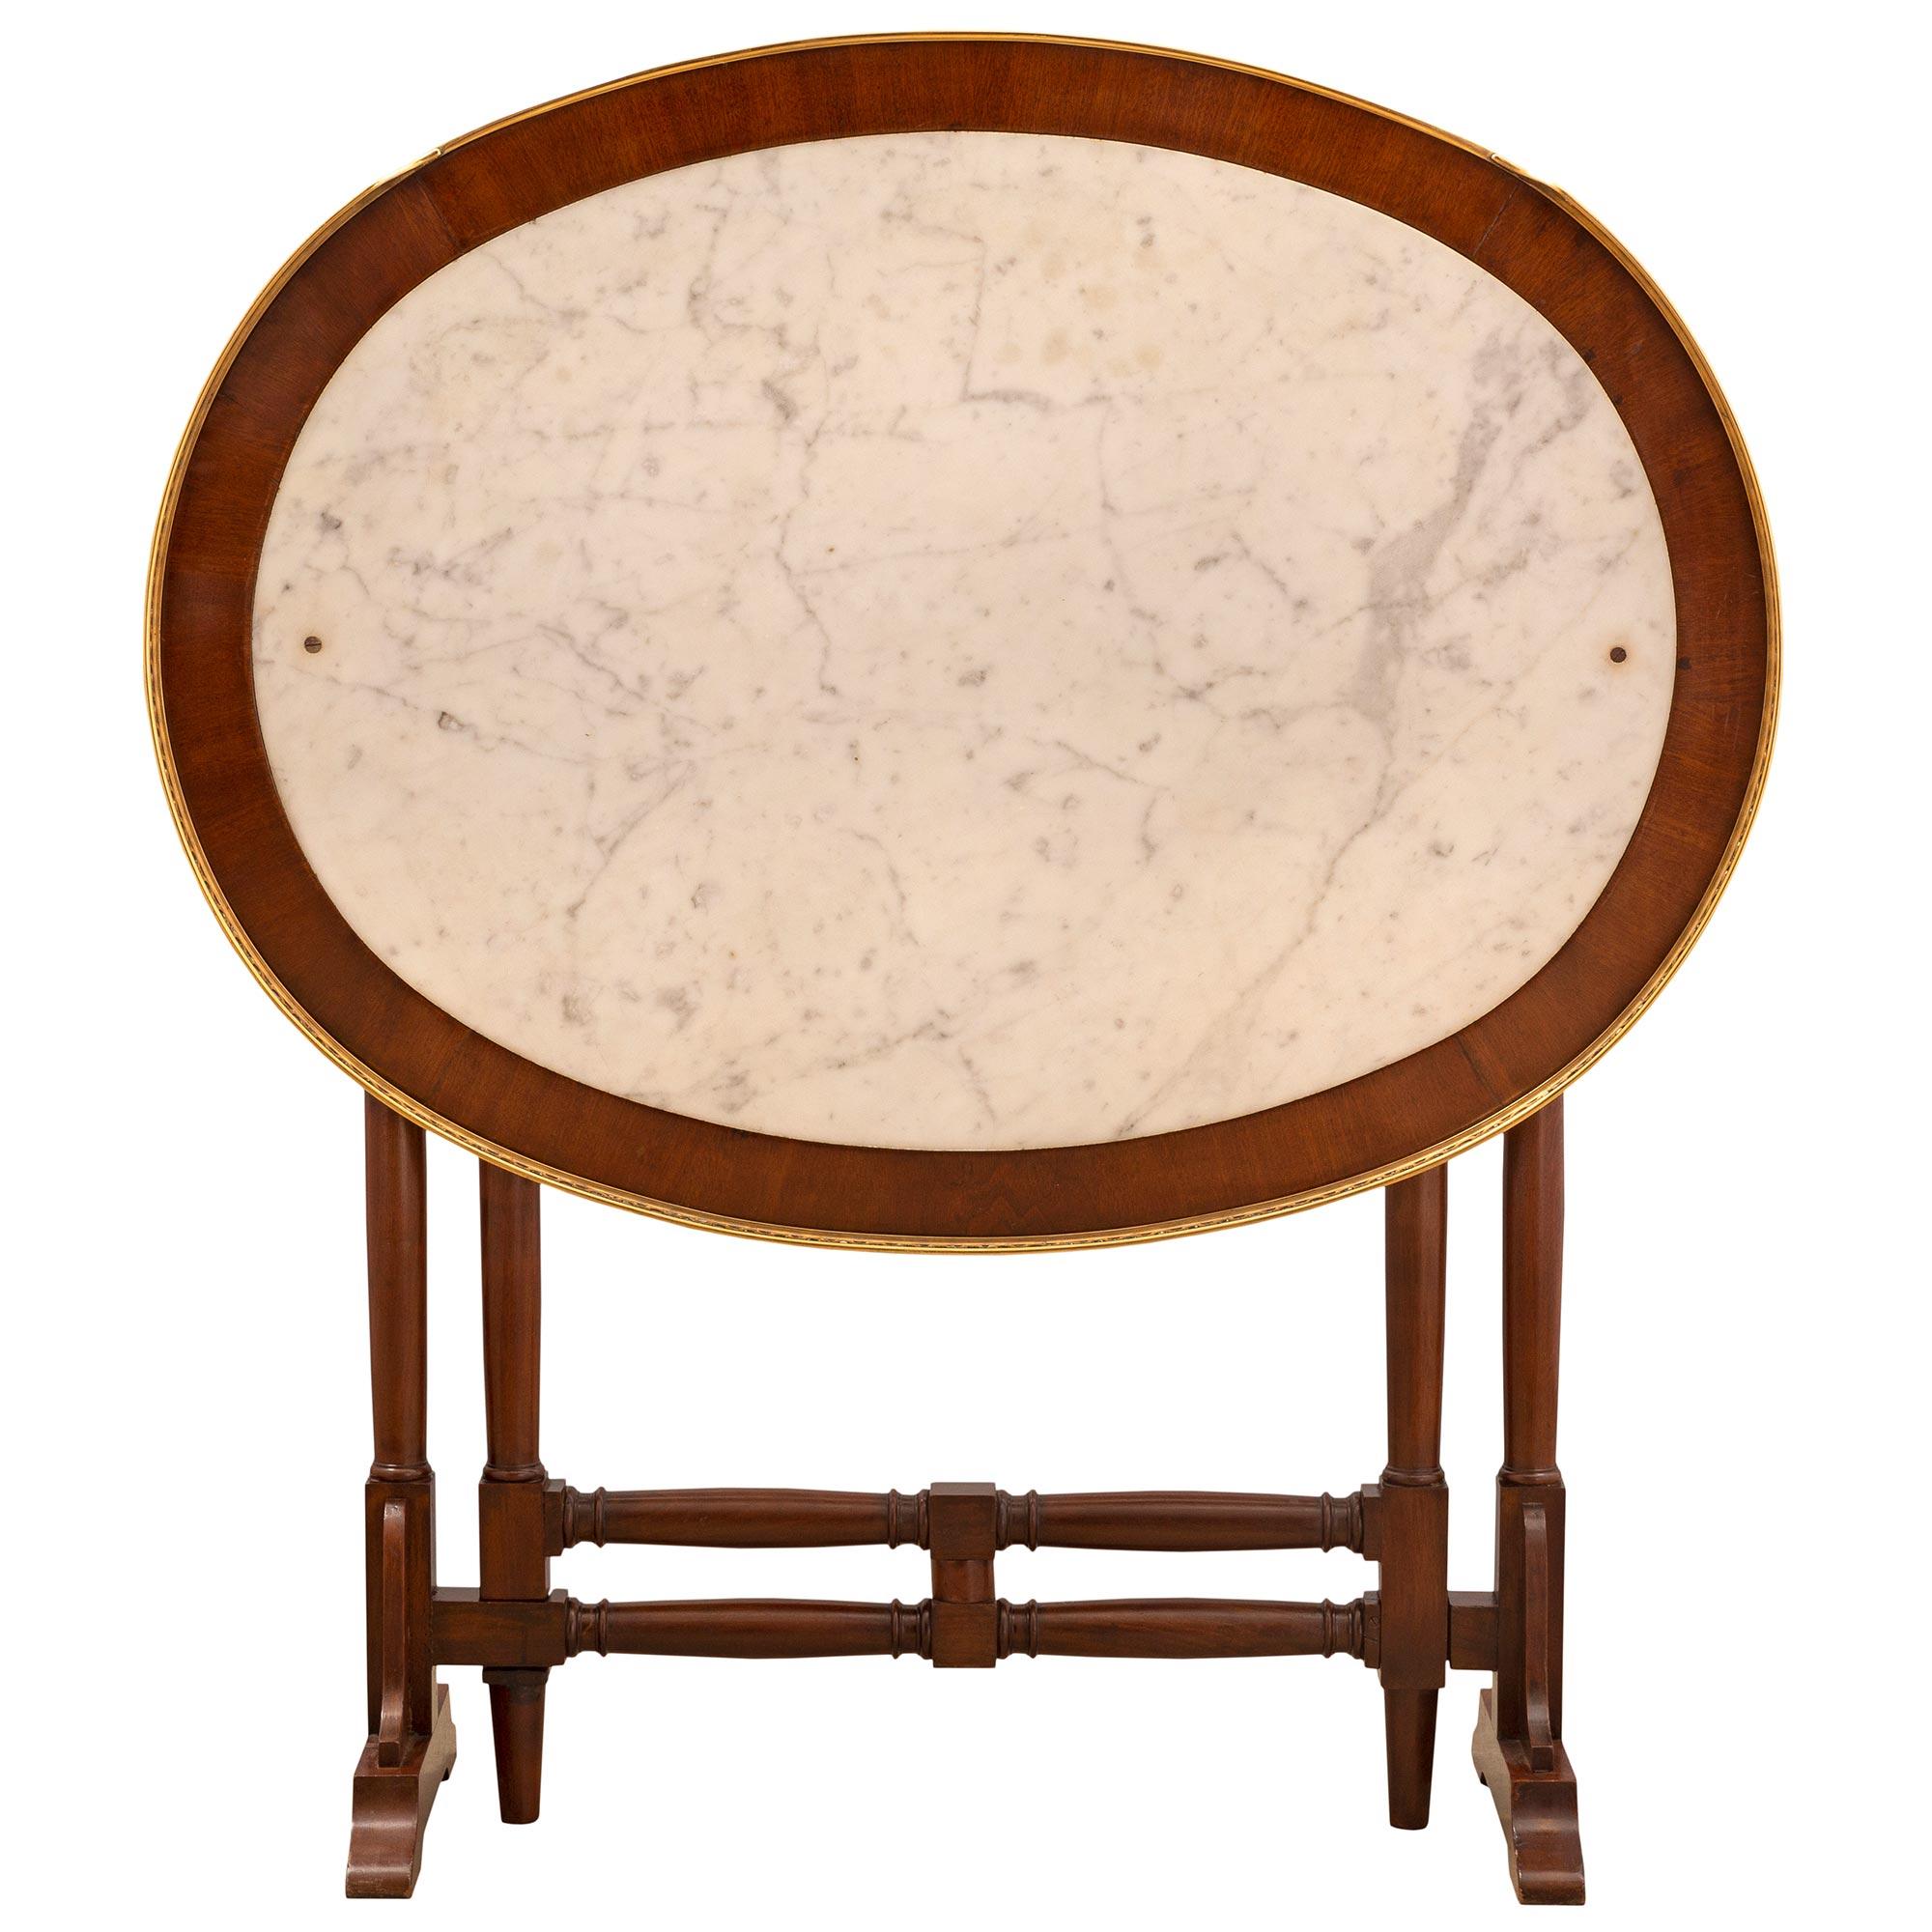 An elegant French mid 19th century Louis XVI st. mahogany, ormolu, and white Carrara marble gateleg table. The oval shaped table is raised by beautifully turned legs with arched supports at each side and elegantly curved elements. Each outer support